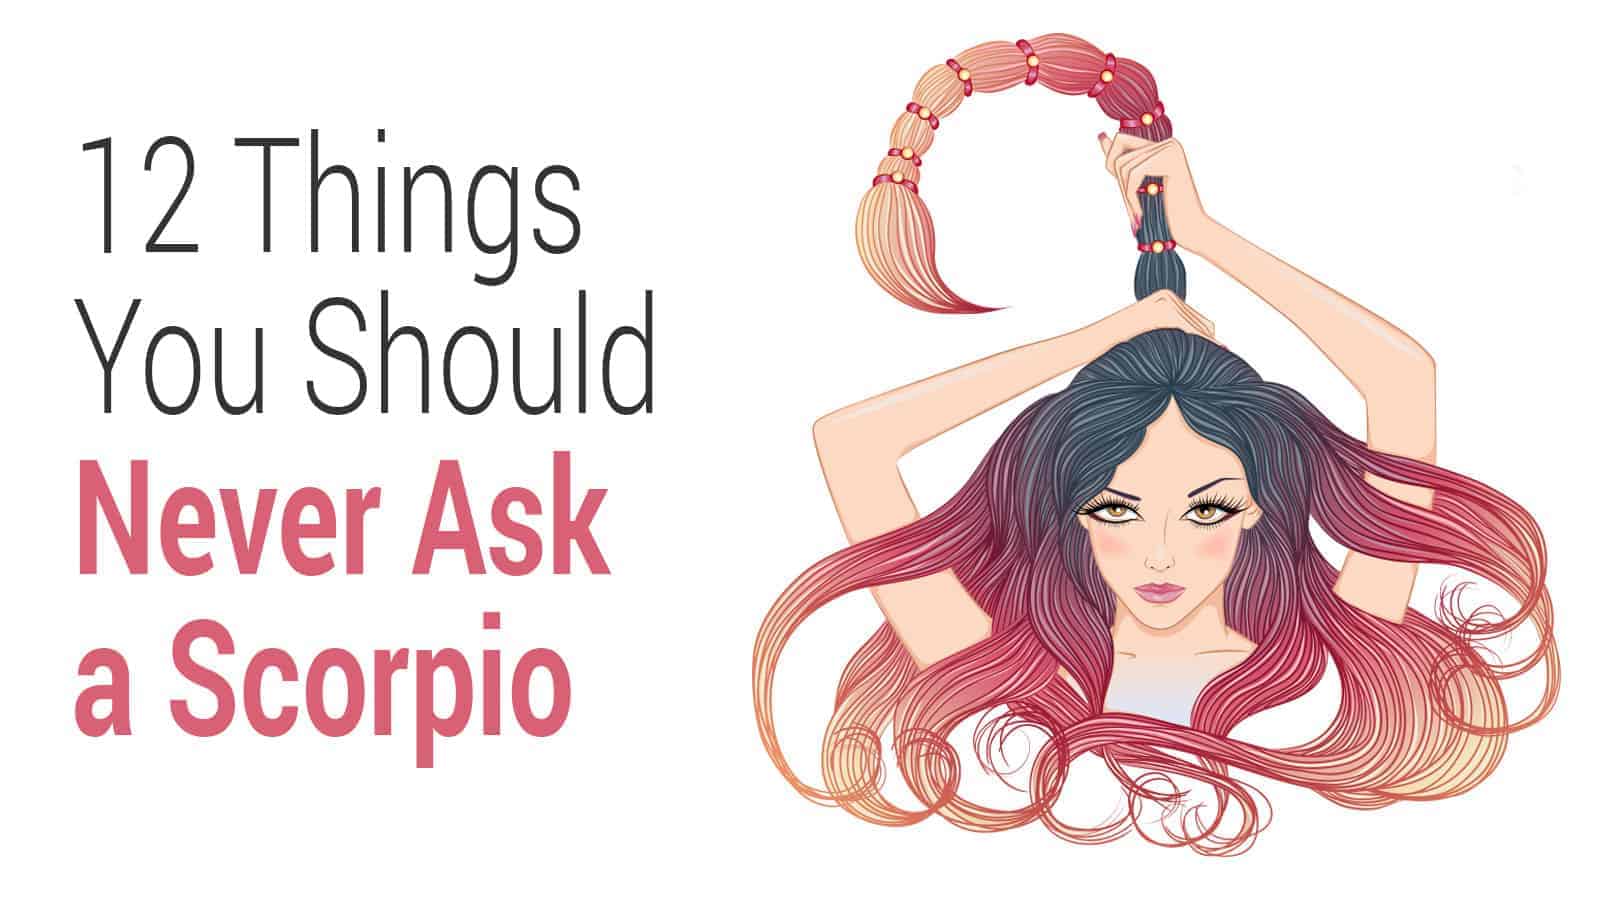 12 Things You Should Never Ask a Scorpio